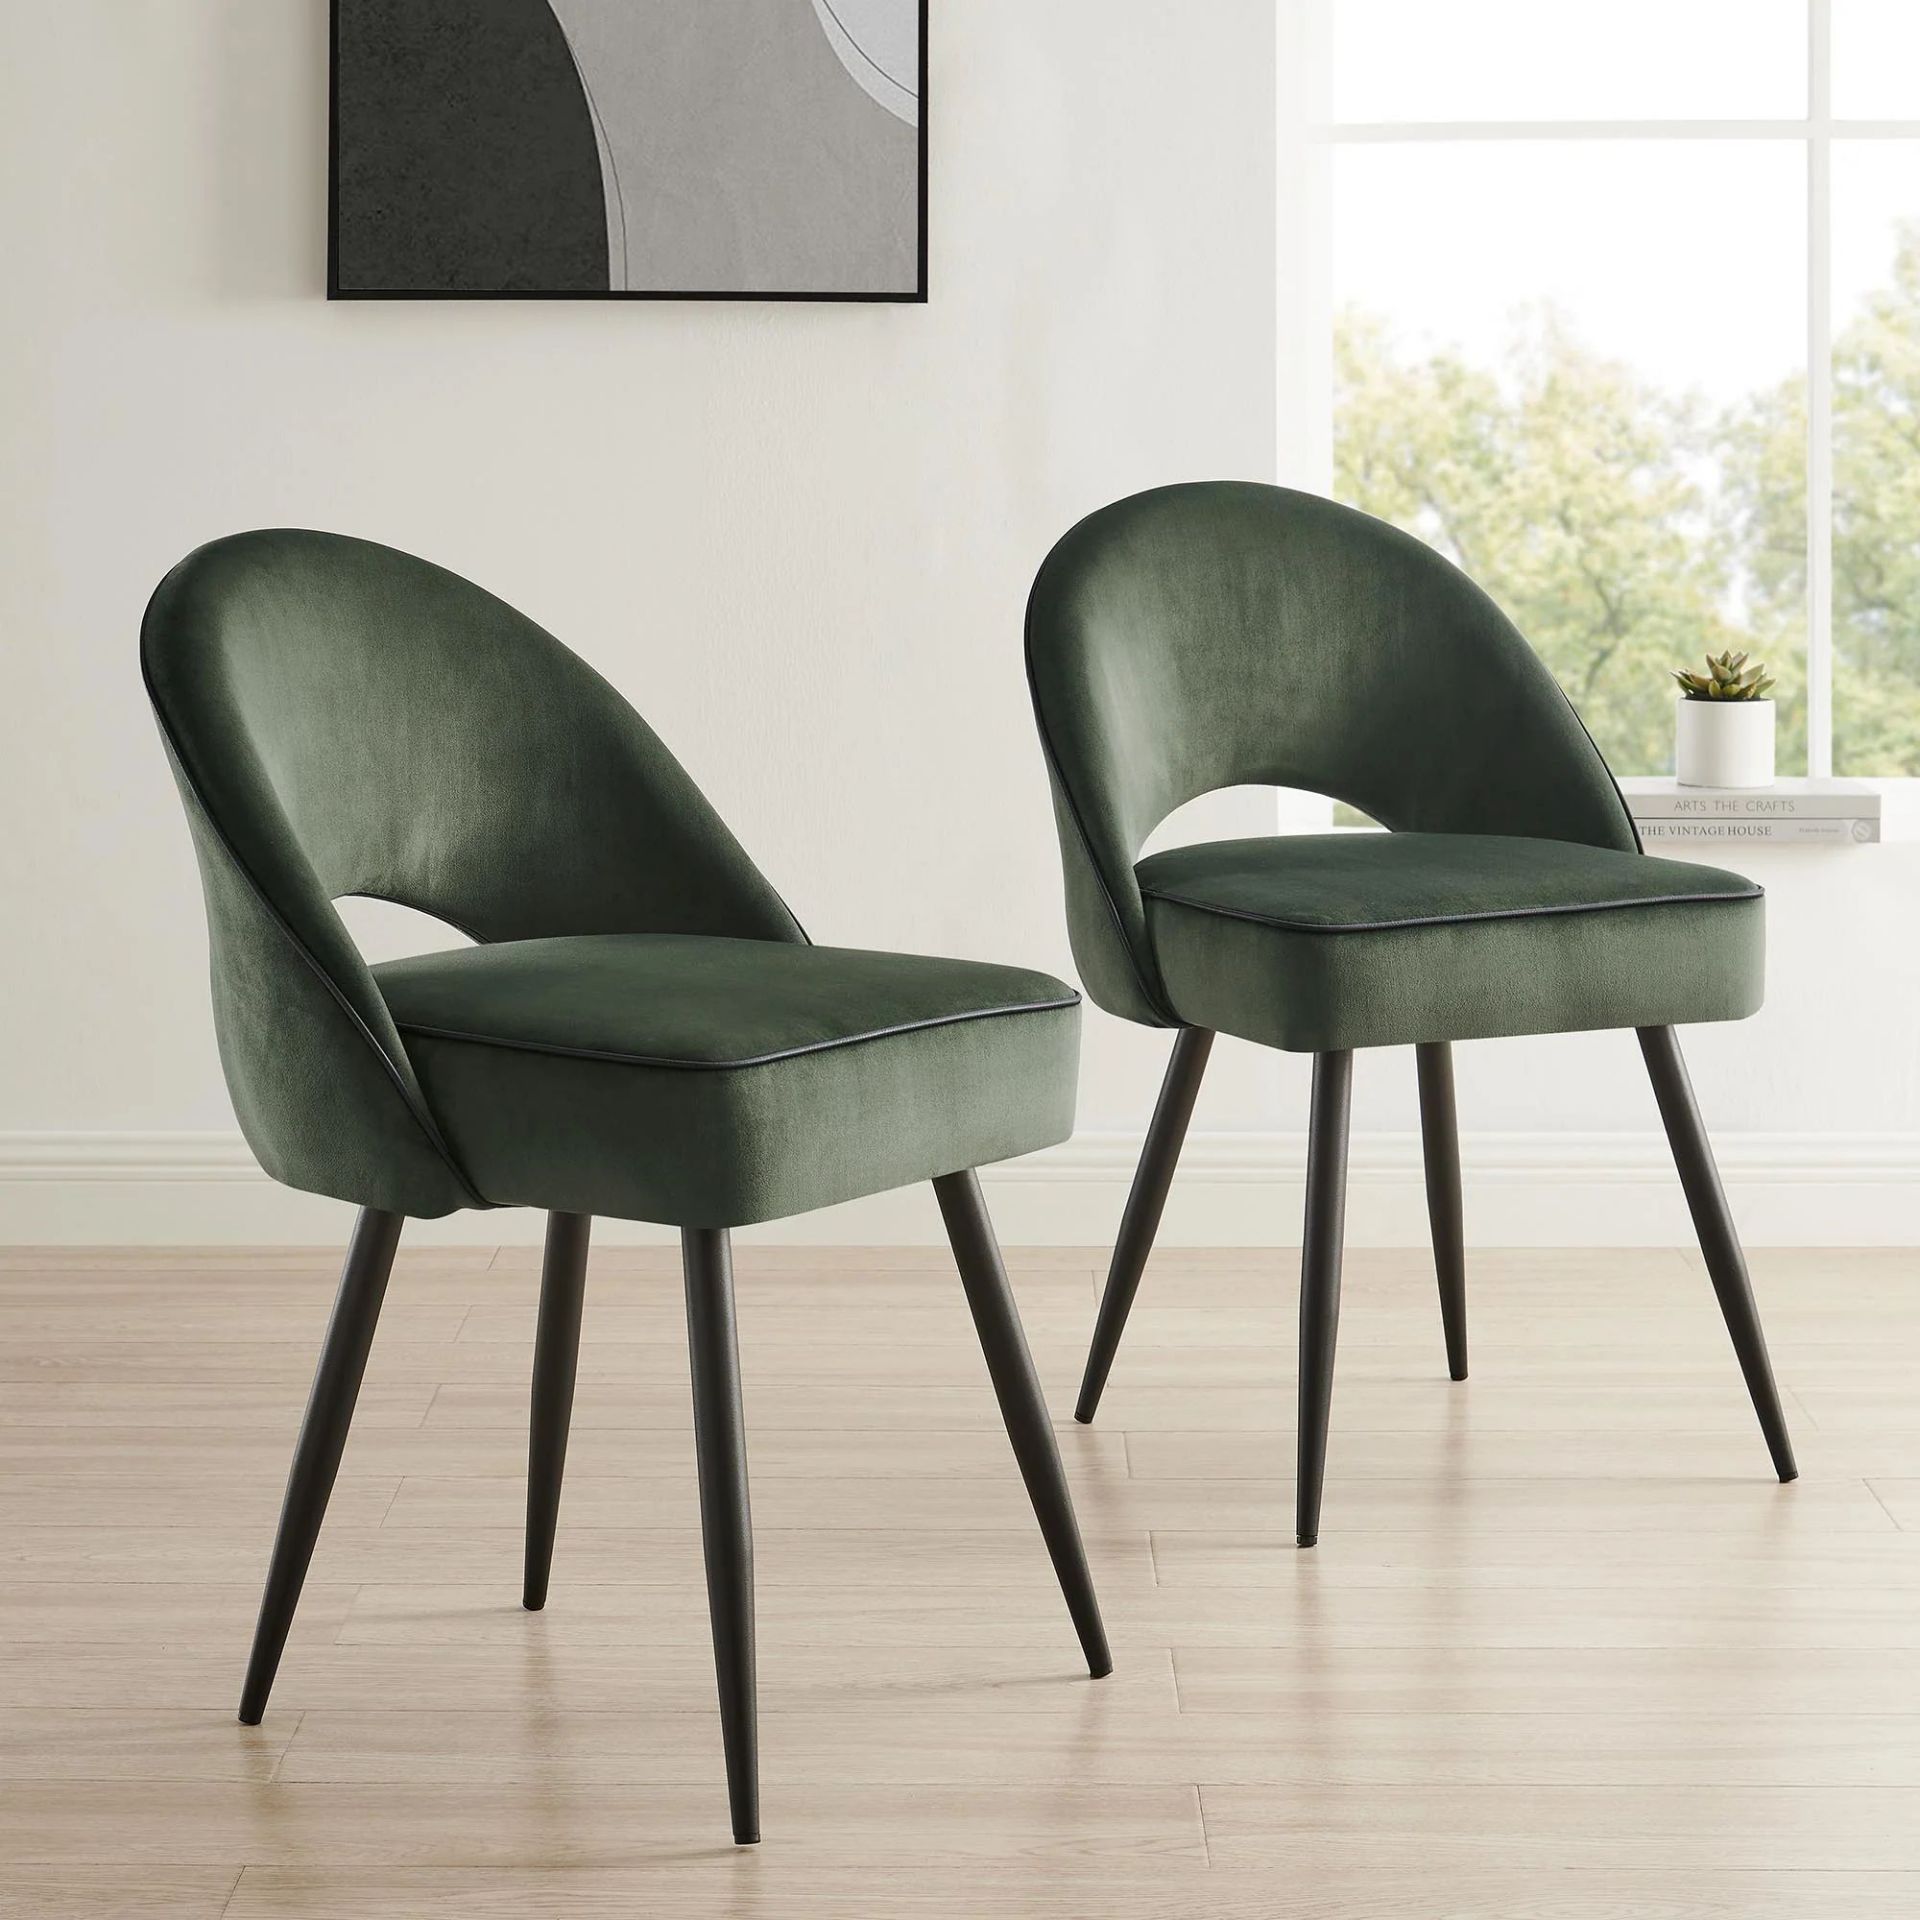 Oakley Set of 2 Dark Green Velvet Upholstered Dining Chairs with Contrast Piping. - R13.14. RRP £